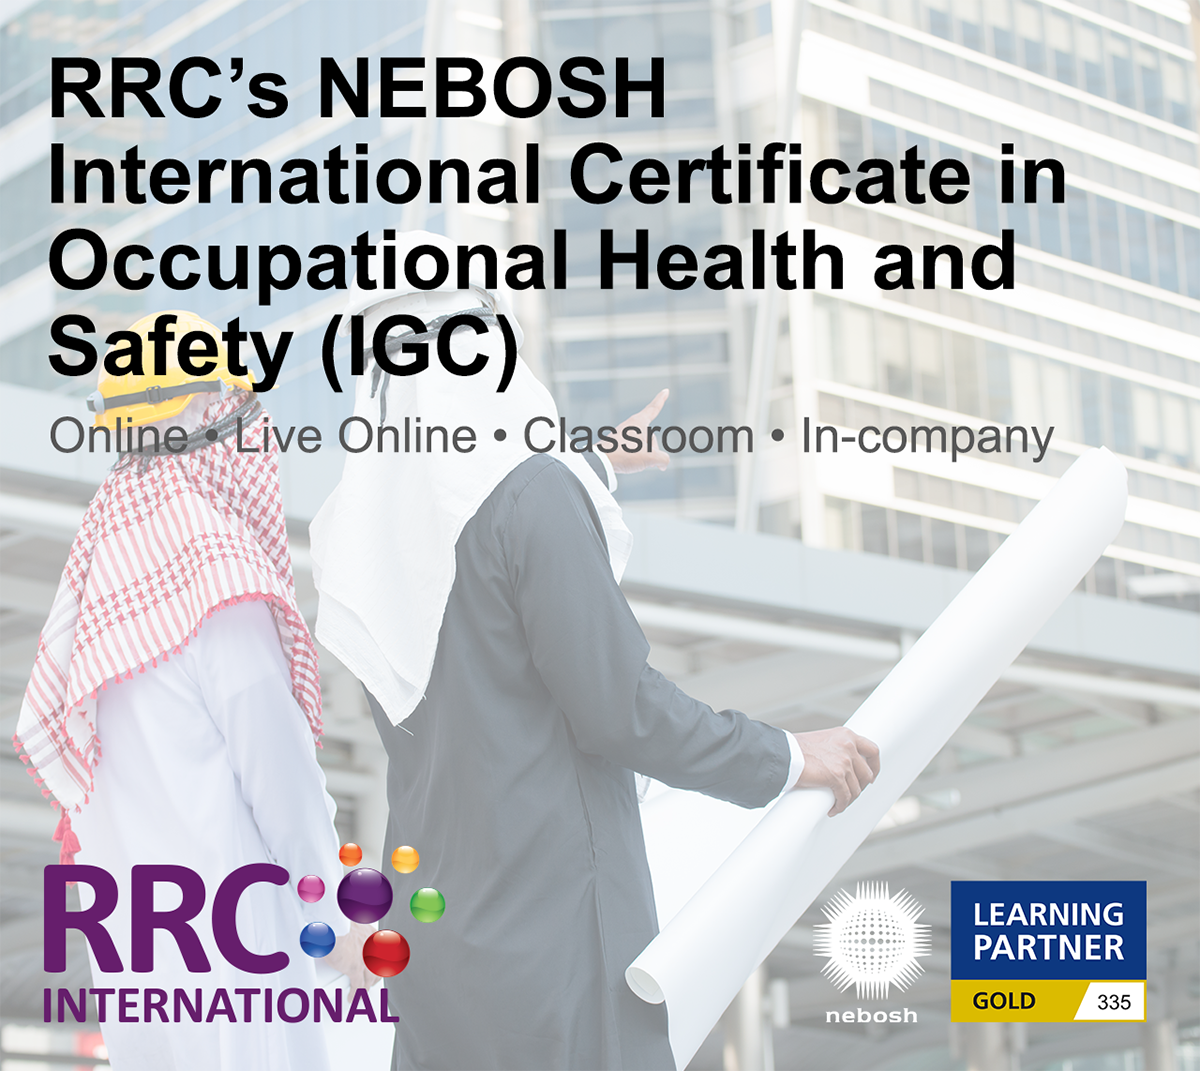 RRC's NEBOSH International General Certificate in Occupational Health and Safety (IGC)